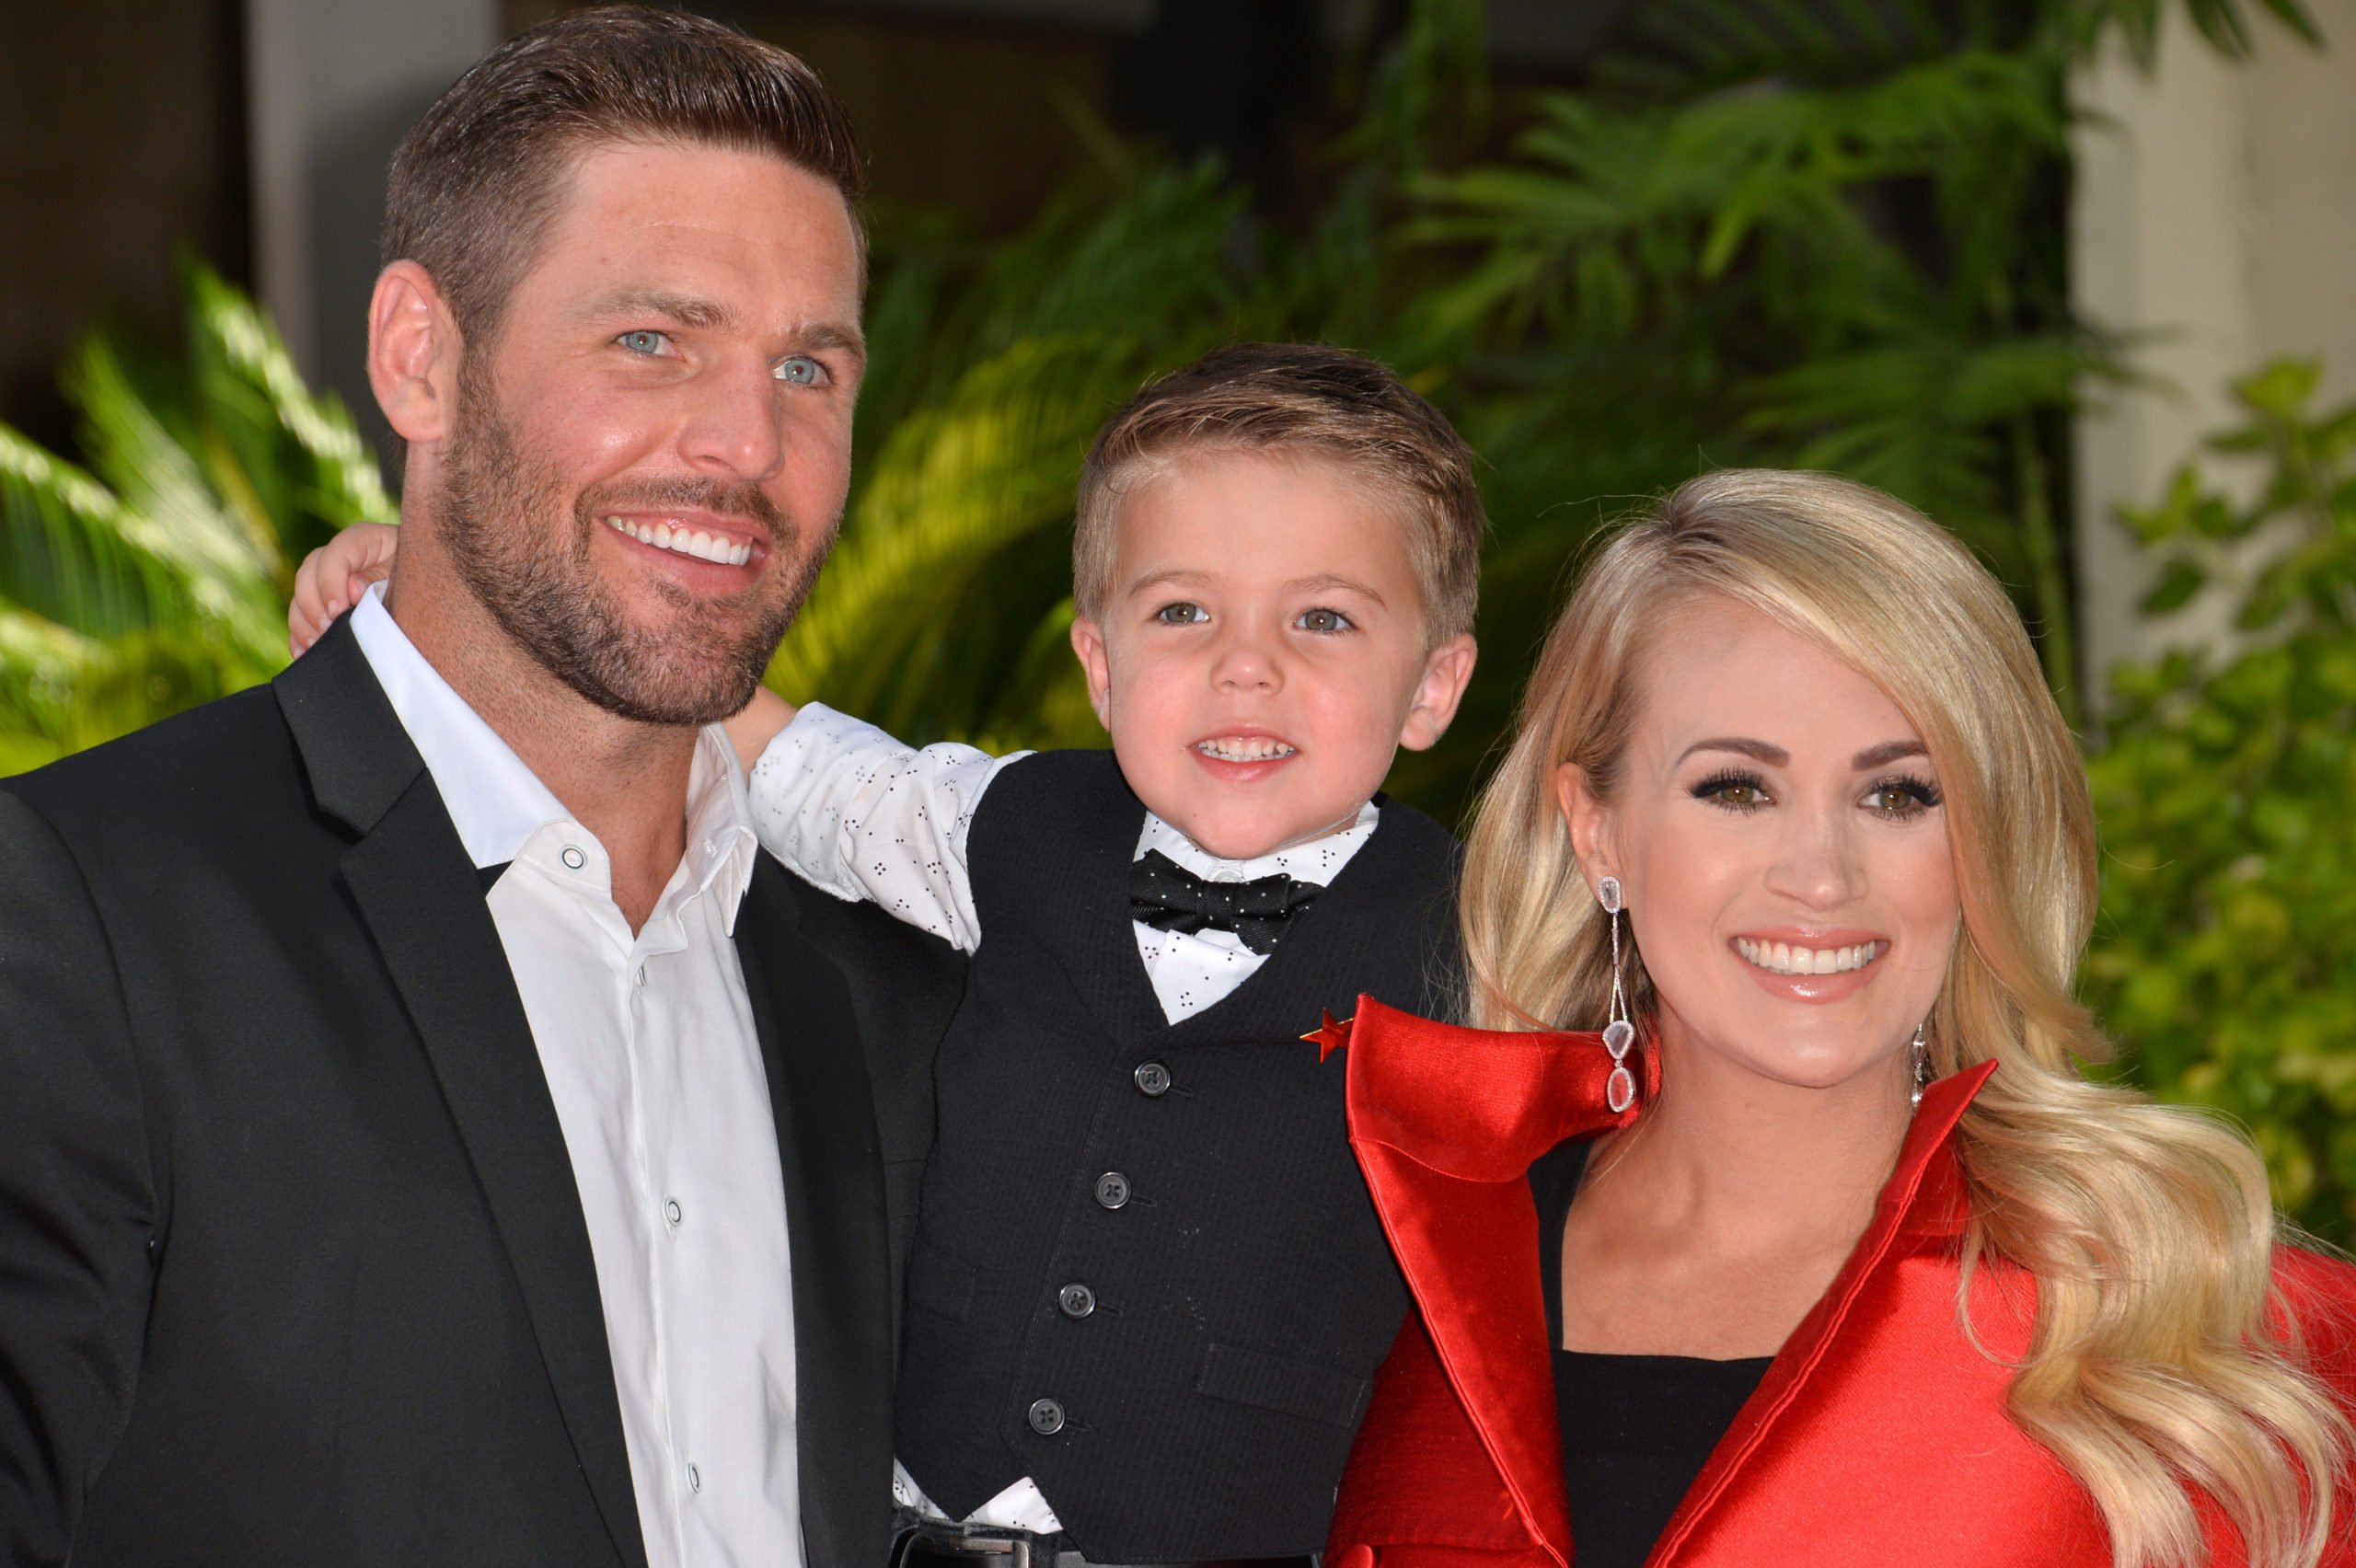 carrie underwood shares adorable video of 3-year-old son working out to an old tae bo video | carrie underwood recently shared an adorable video of her 3-year-old son, jack, working out to an old tae bo exercise video -- it's too cute!